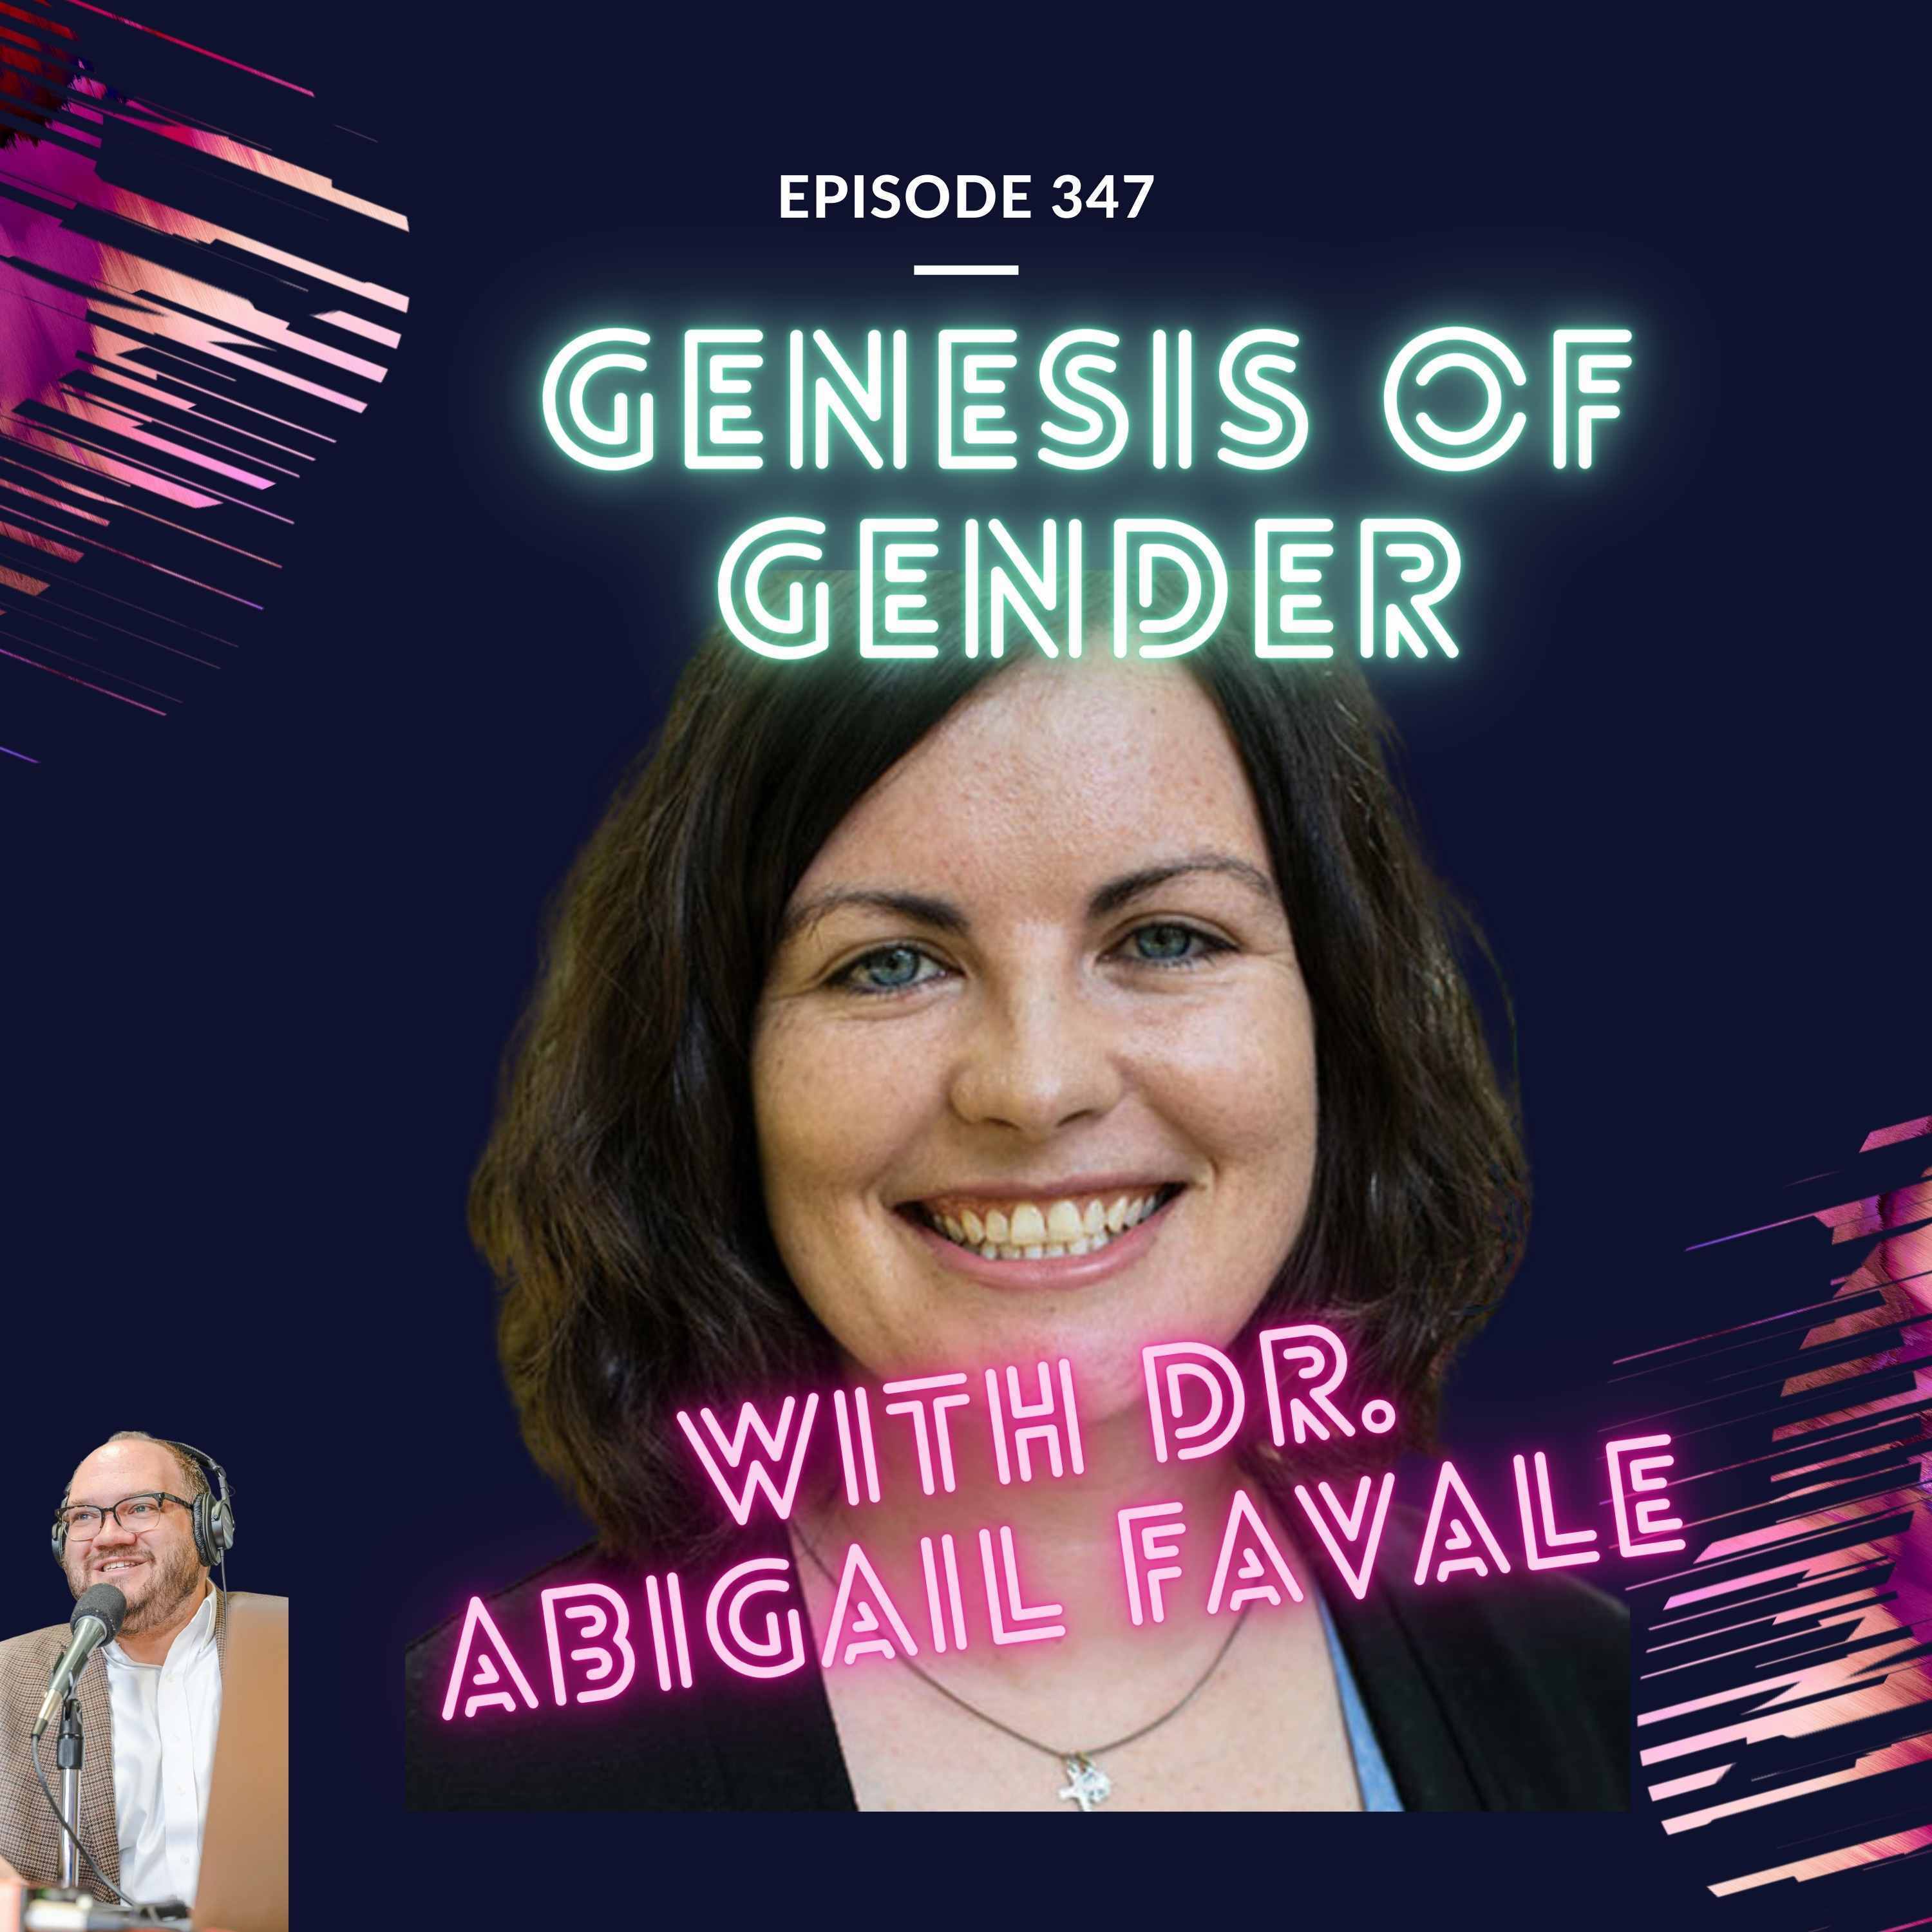 Dr. Abigail Favale on Gender Theory, with surprise guest LUKE CAREY!